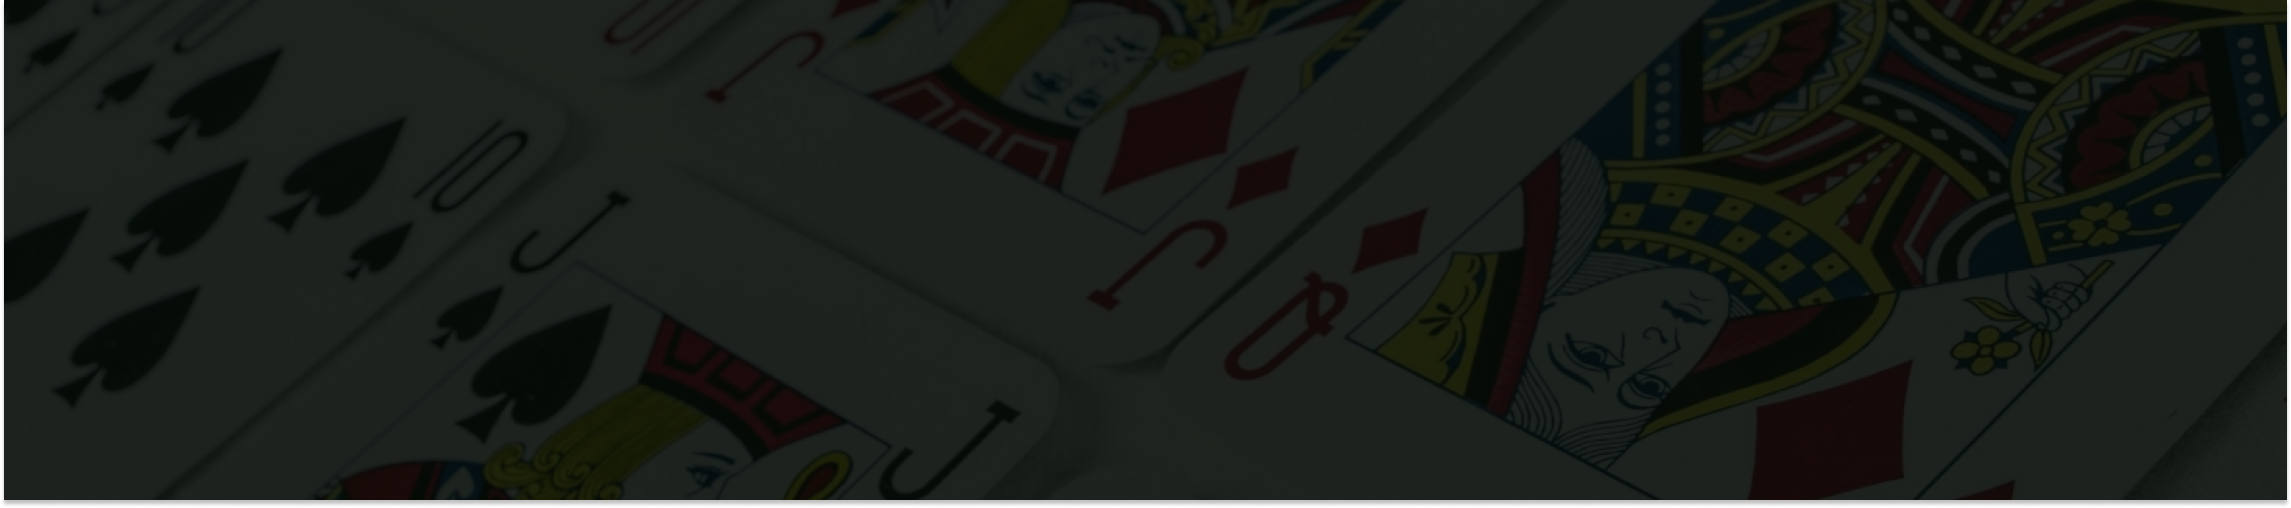 parx-casino Casino Review Banner